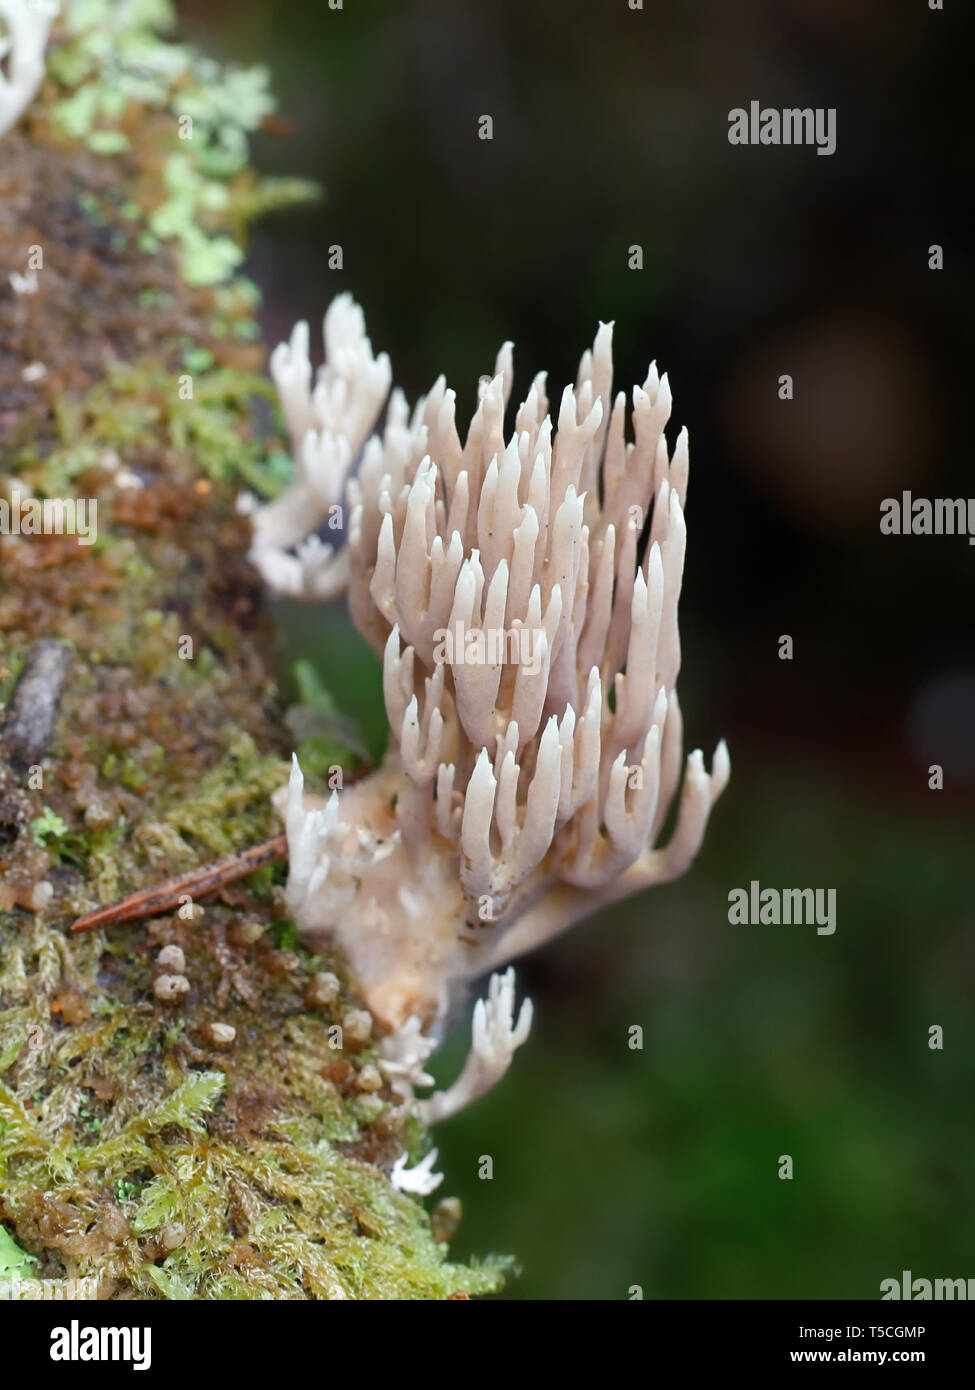 Ramaria apiculata, known as the Green-tipped Coral Fungus, wild mushroom from Finland Stock Photo